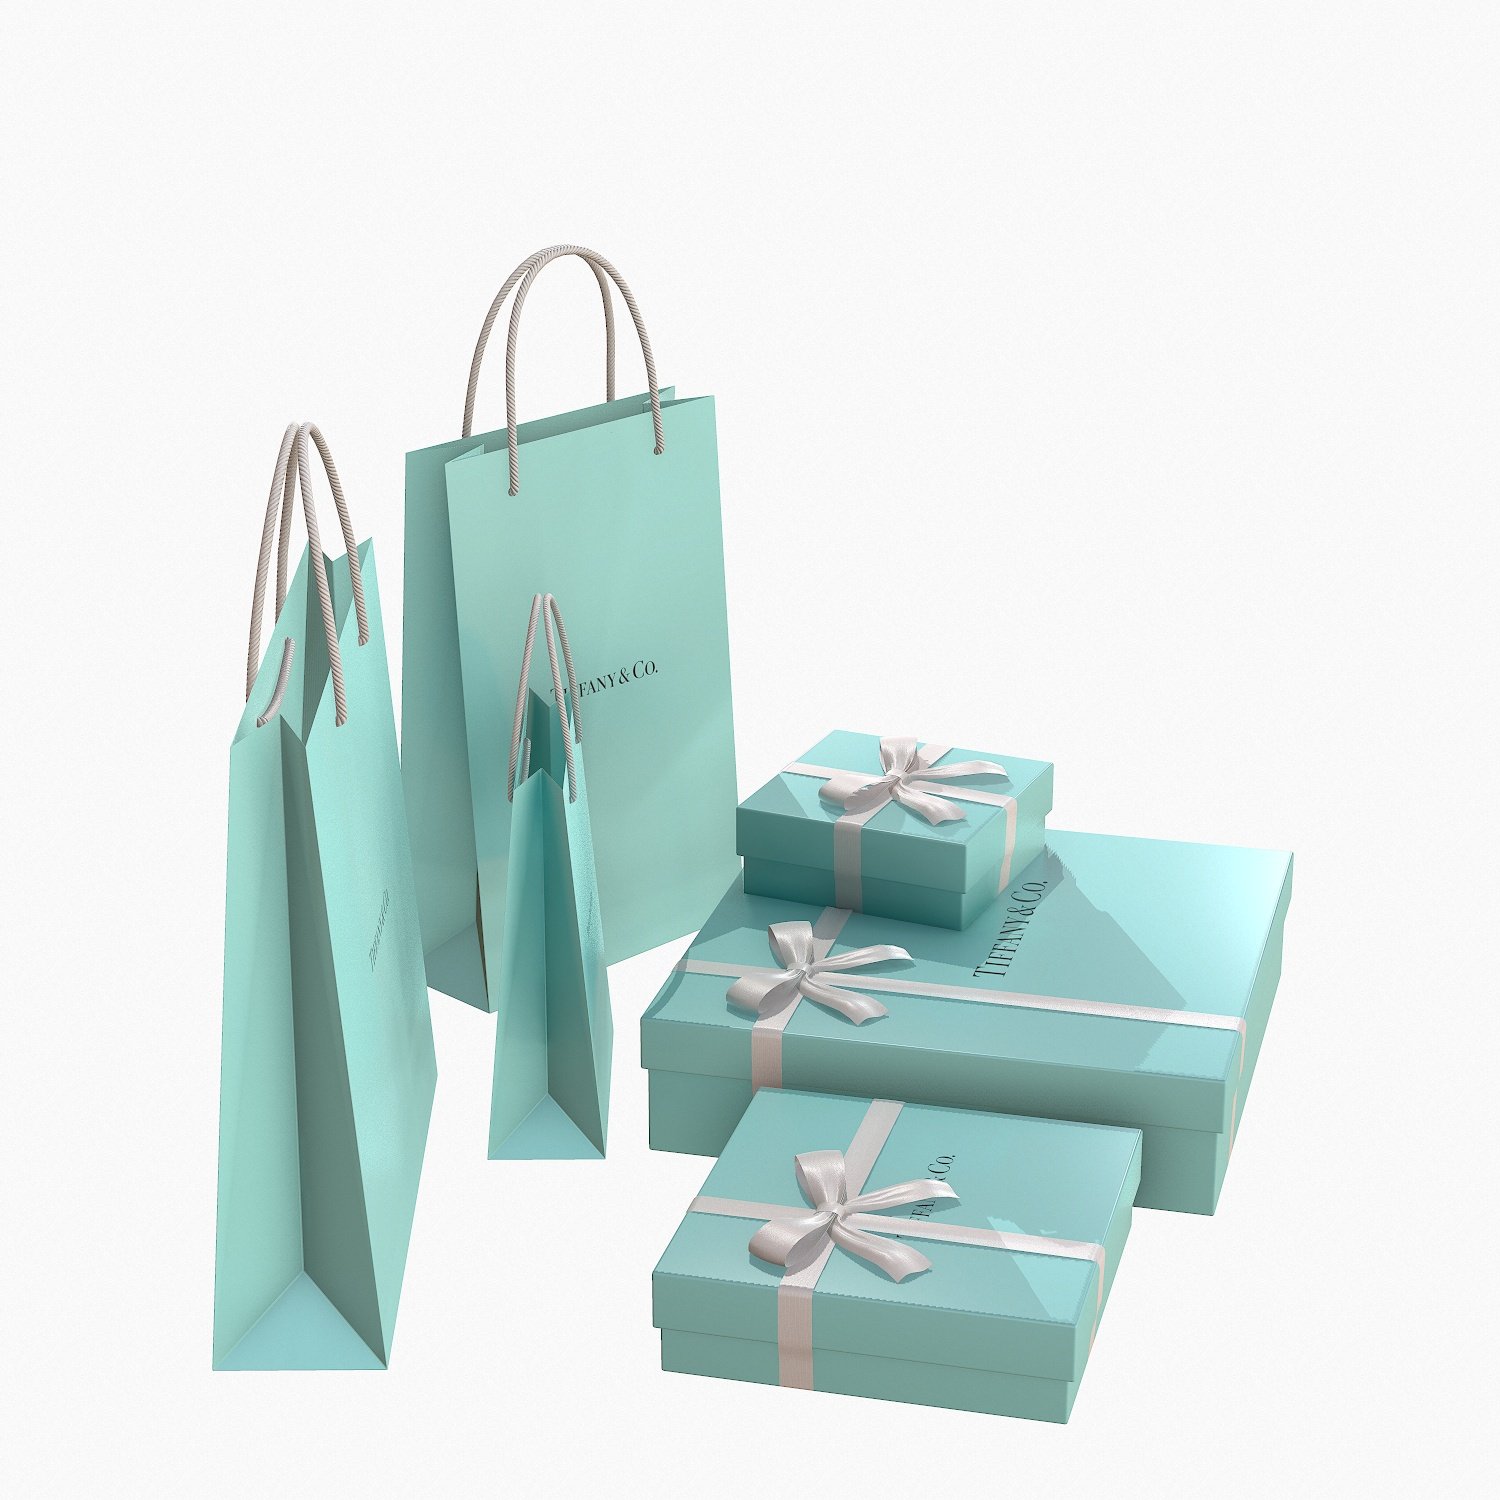 Tiffany Gift Packaging Boxes and Paper Bags | 3D model